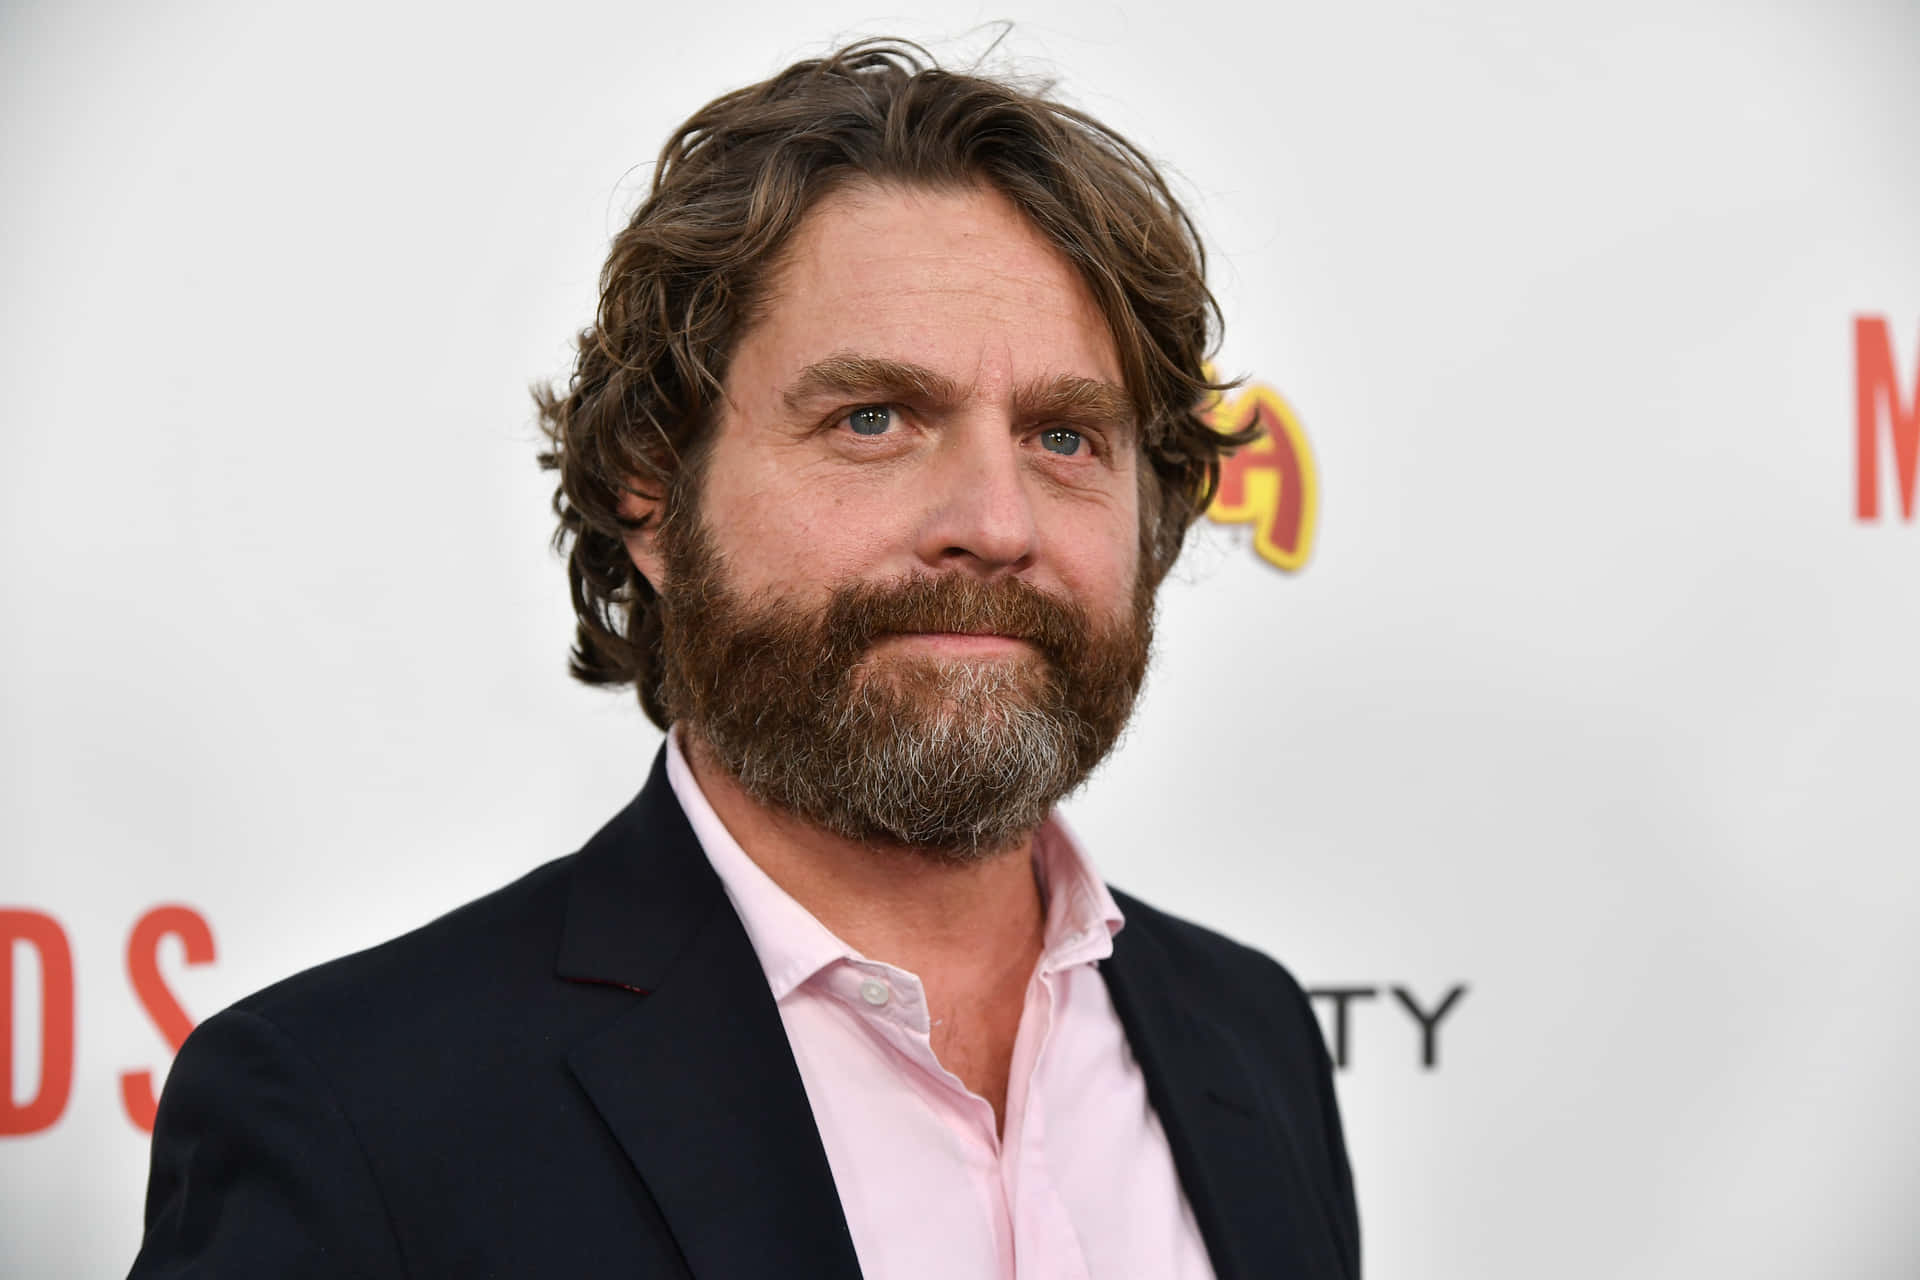 Actor Zach Galifianakis smiling on the red carpet Wallpaper